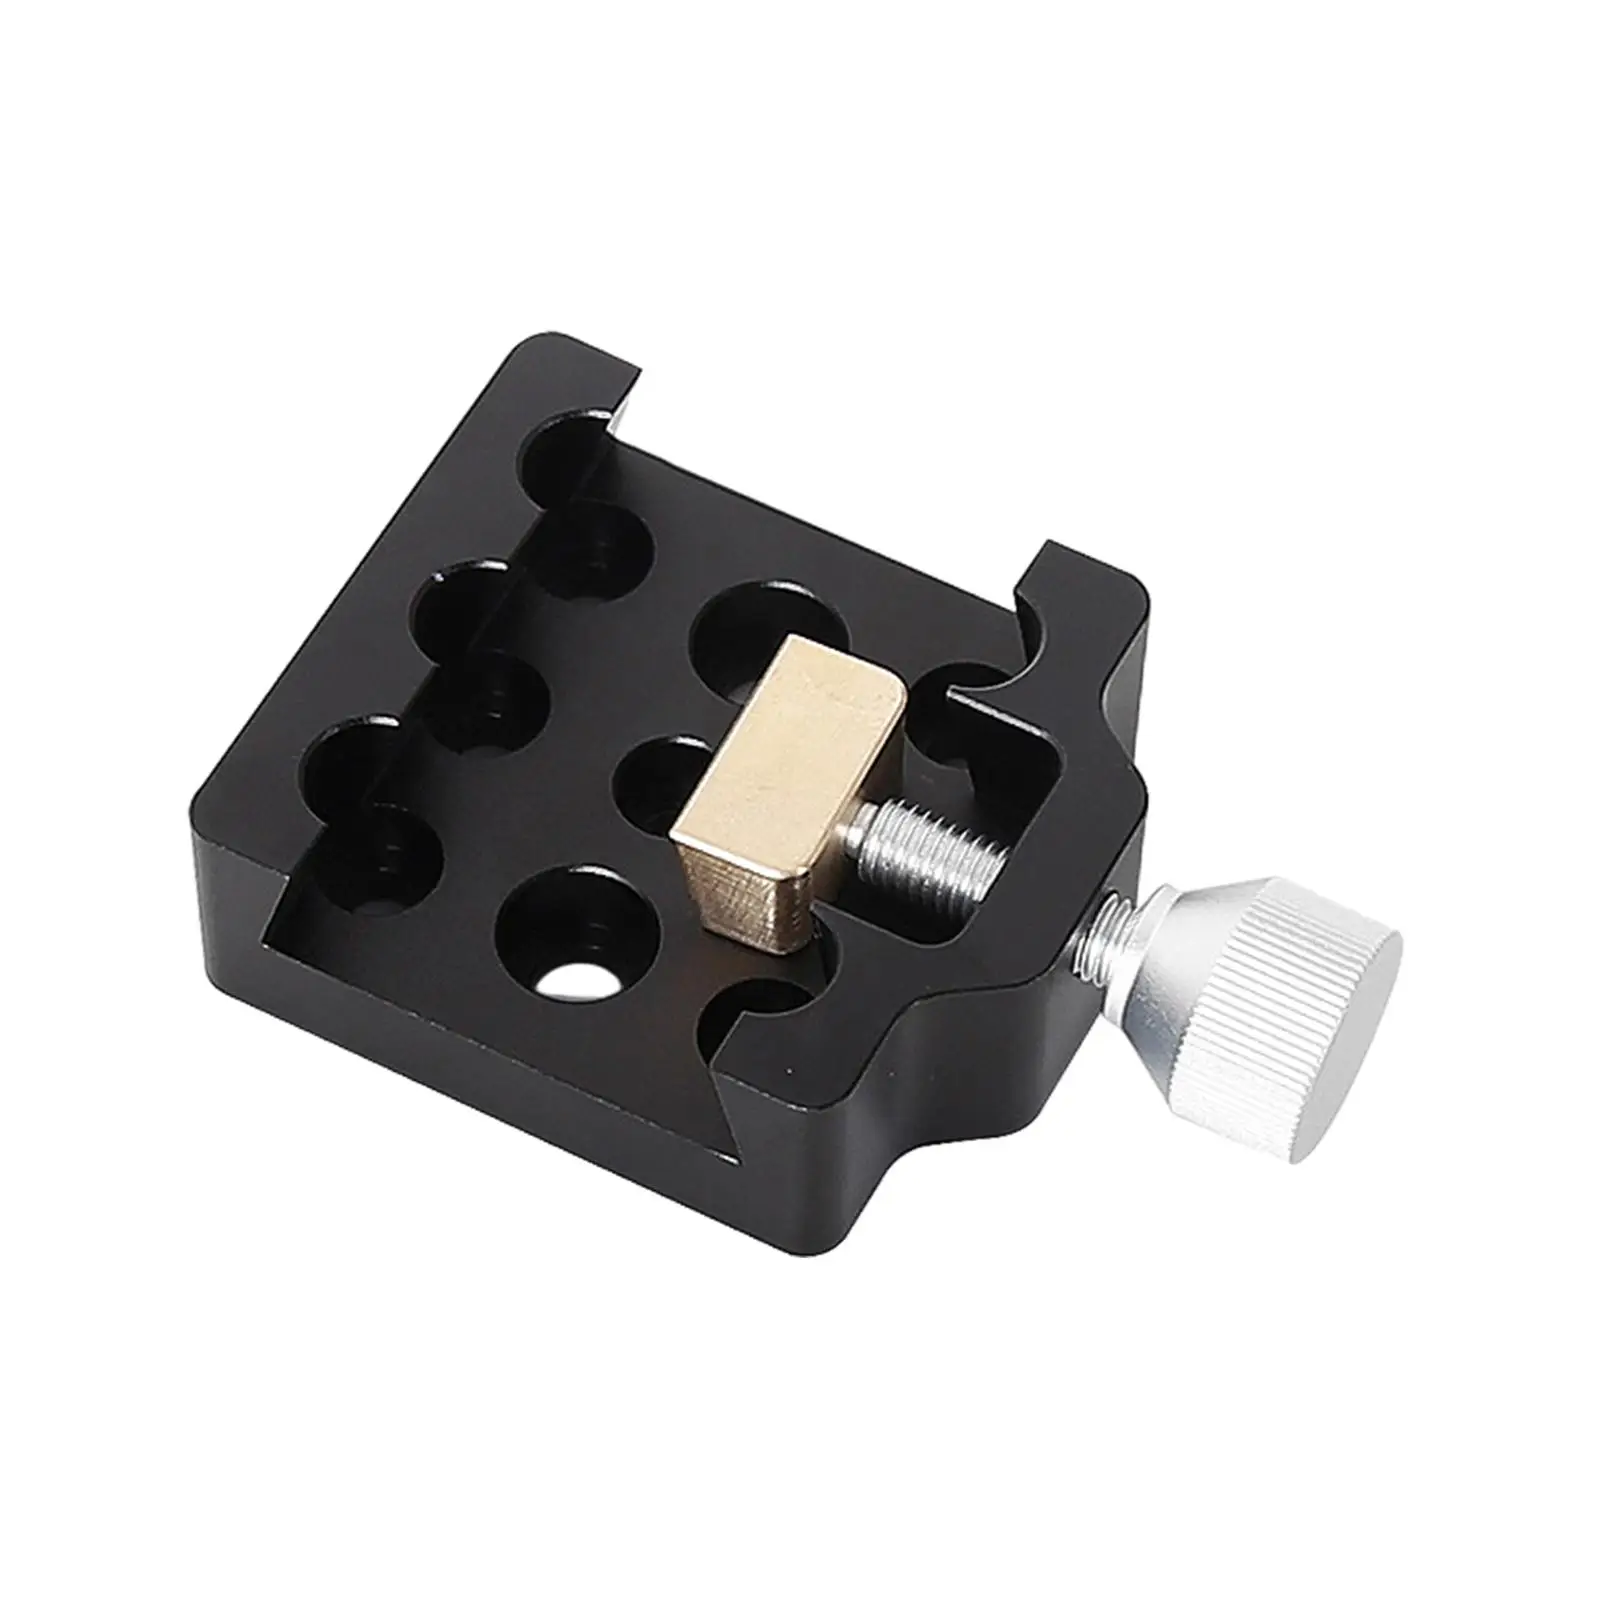 Telescope Adapter Mount Base Saddle Clamp Professional for Equatorial Head